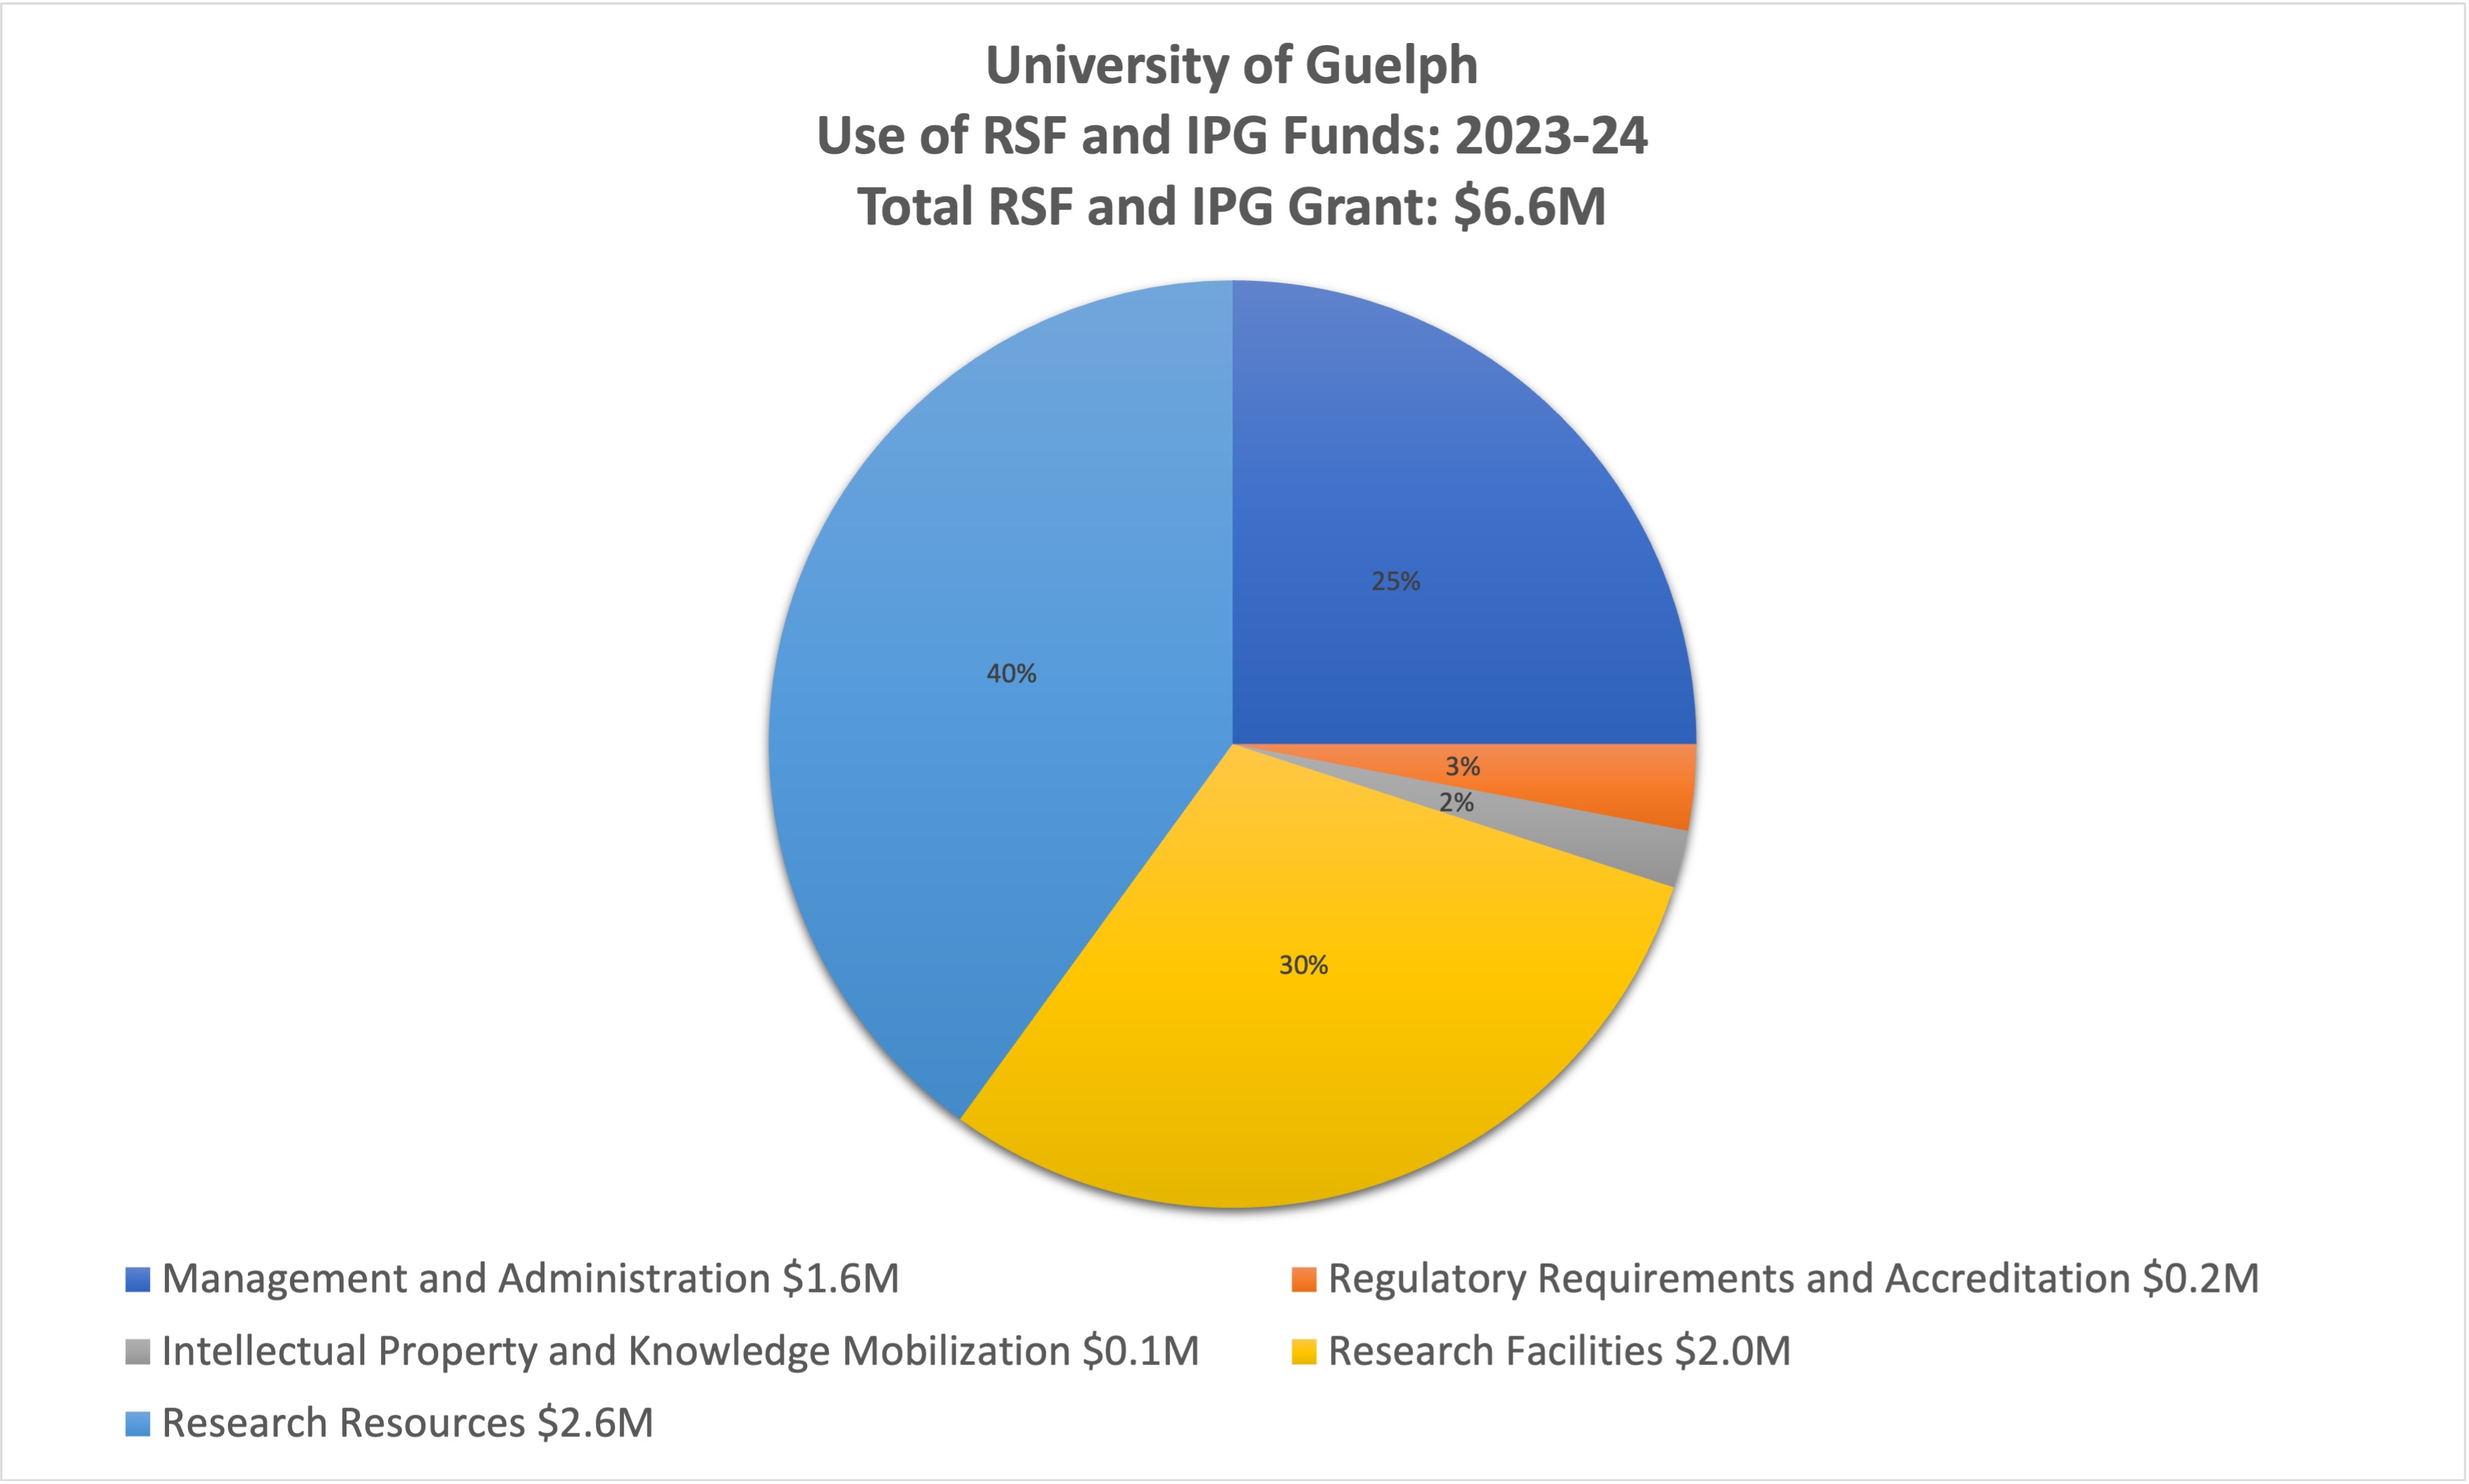 University of Guelph - Use of RSF and IPG Funds: 2023-24 - Total RSF and IPG Grant: $6.6M. Management and Administration - $1.6M. Regulatory Requirements - $0.2M. Intellectual Property - $0.1M. Facilities - $2.0M. Research Resources $2.6M.